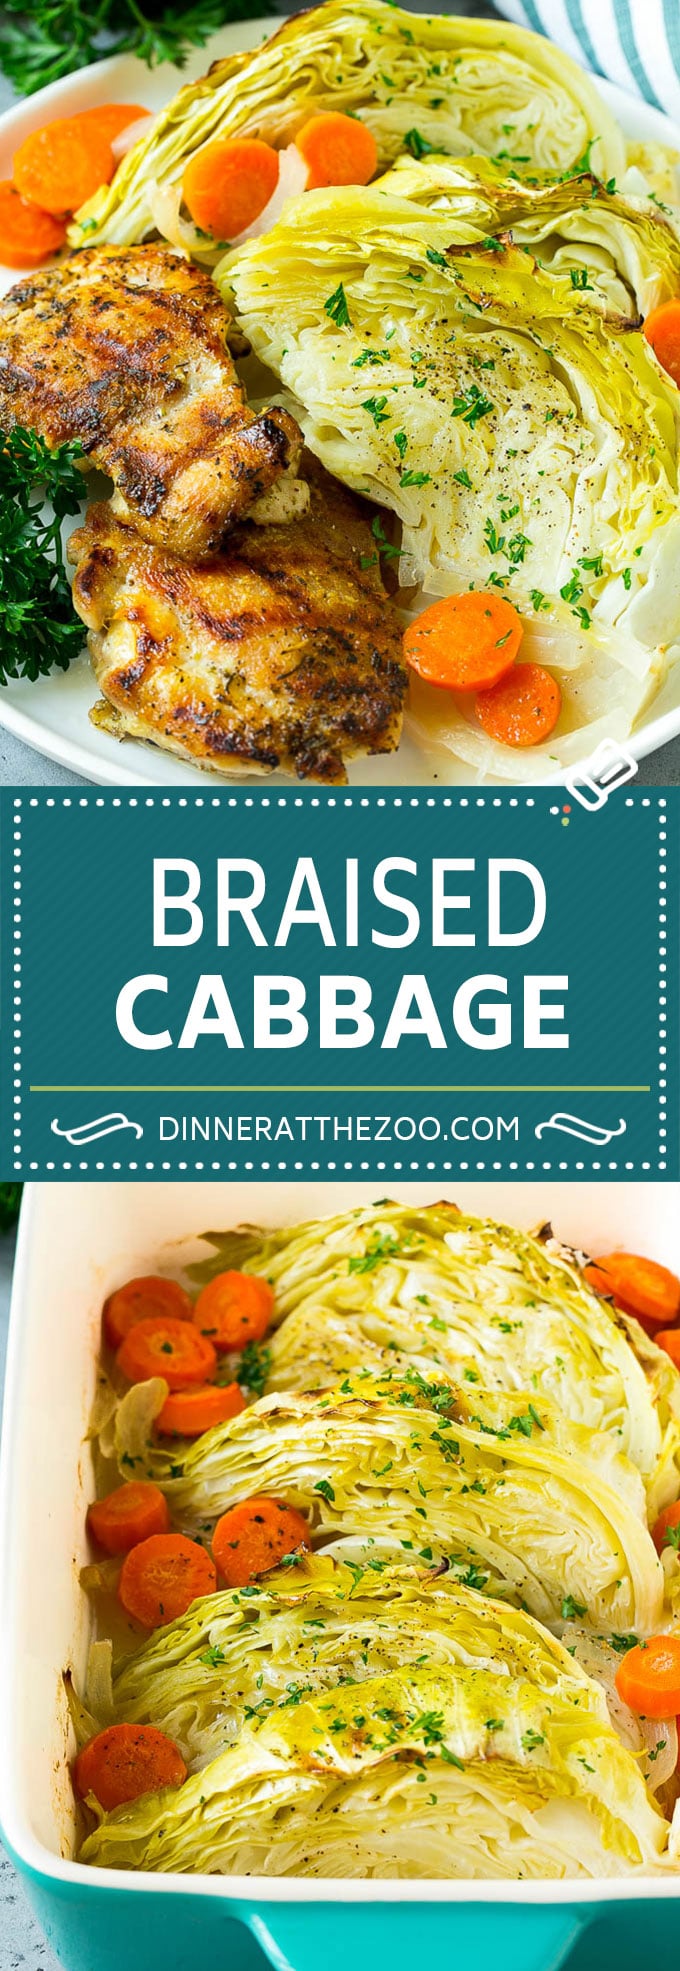 Braised Cabbage Recipe | Easy Cabbage Recipe #cabbage #lowcarb #keto #carrots #veggies #vegetarian #dinner #dinneratthezoo